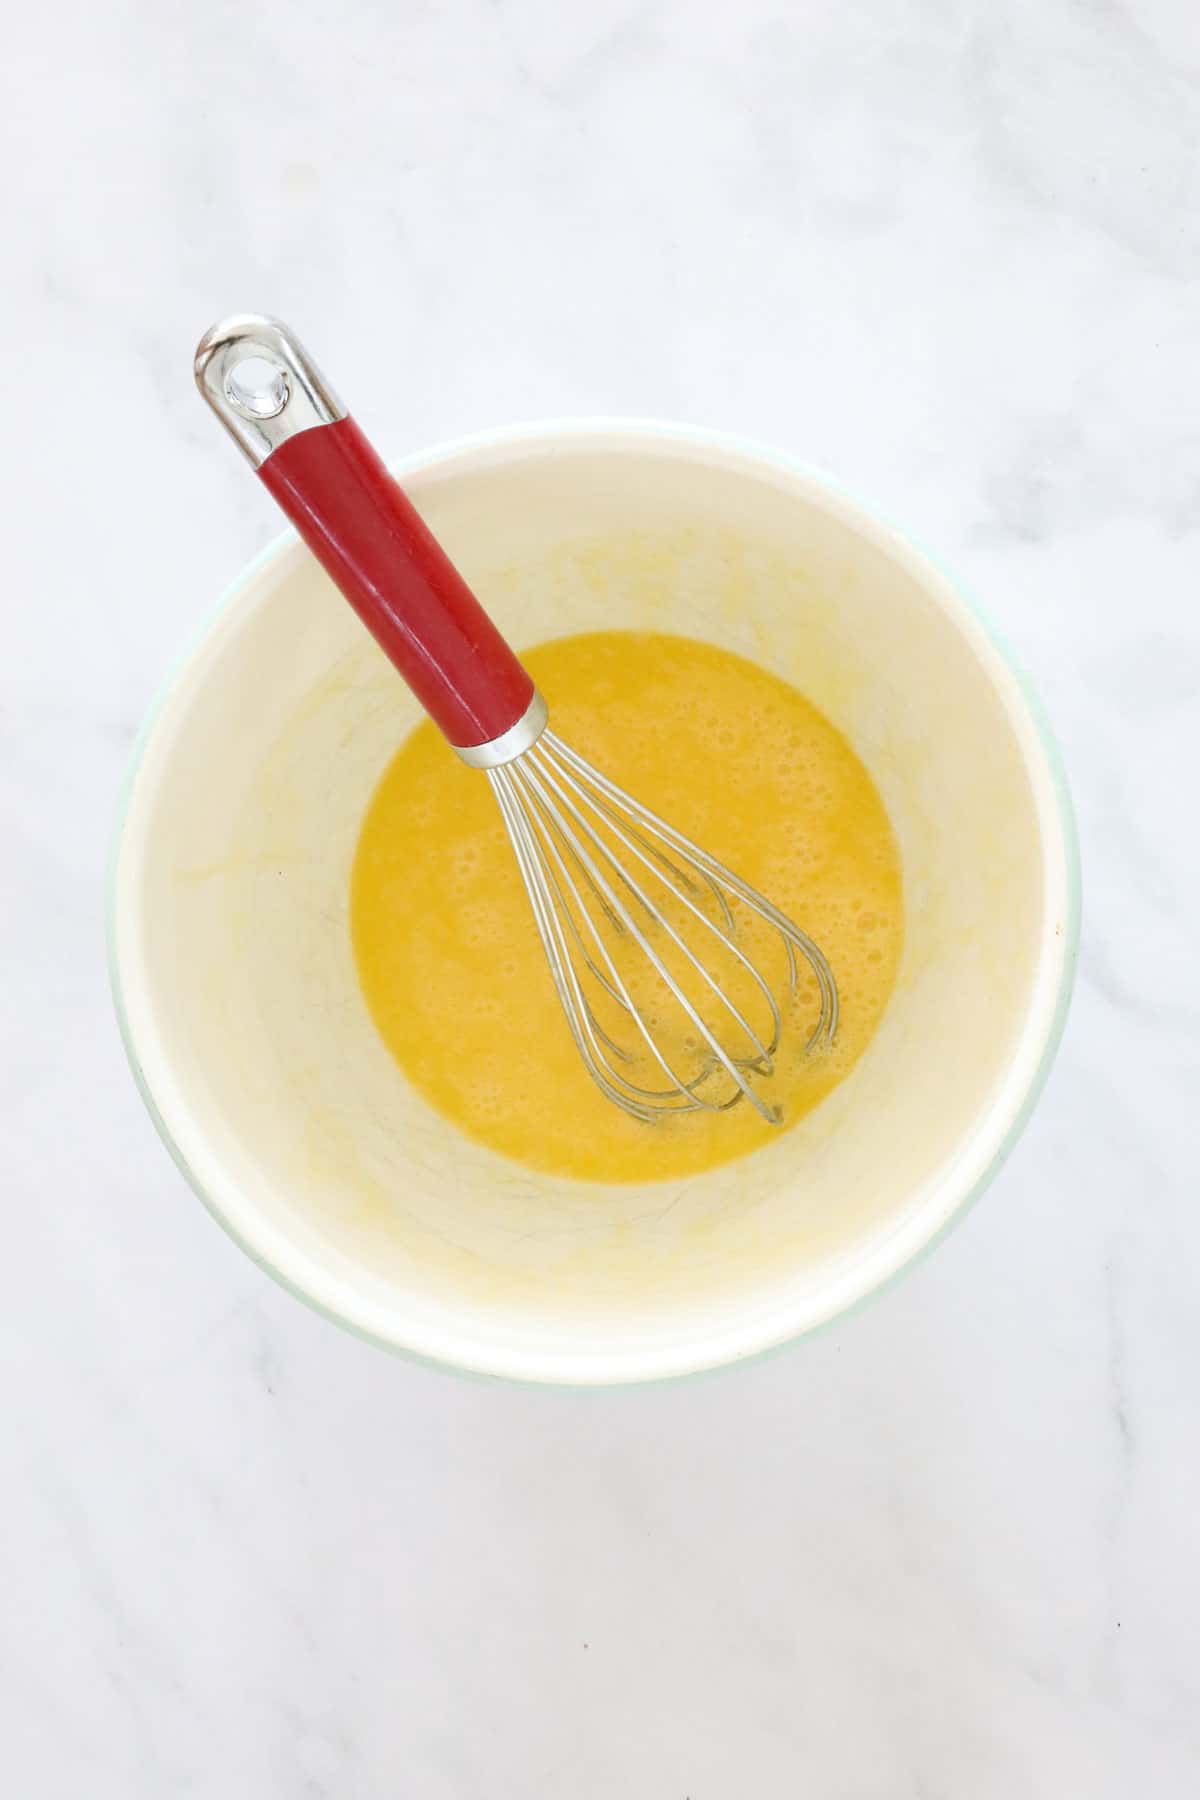 Melted butter in a mixing bowl, with a whisk.